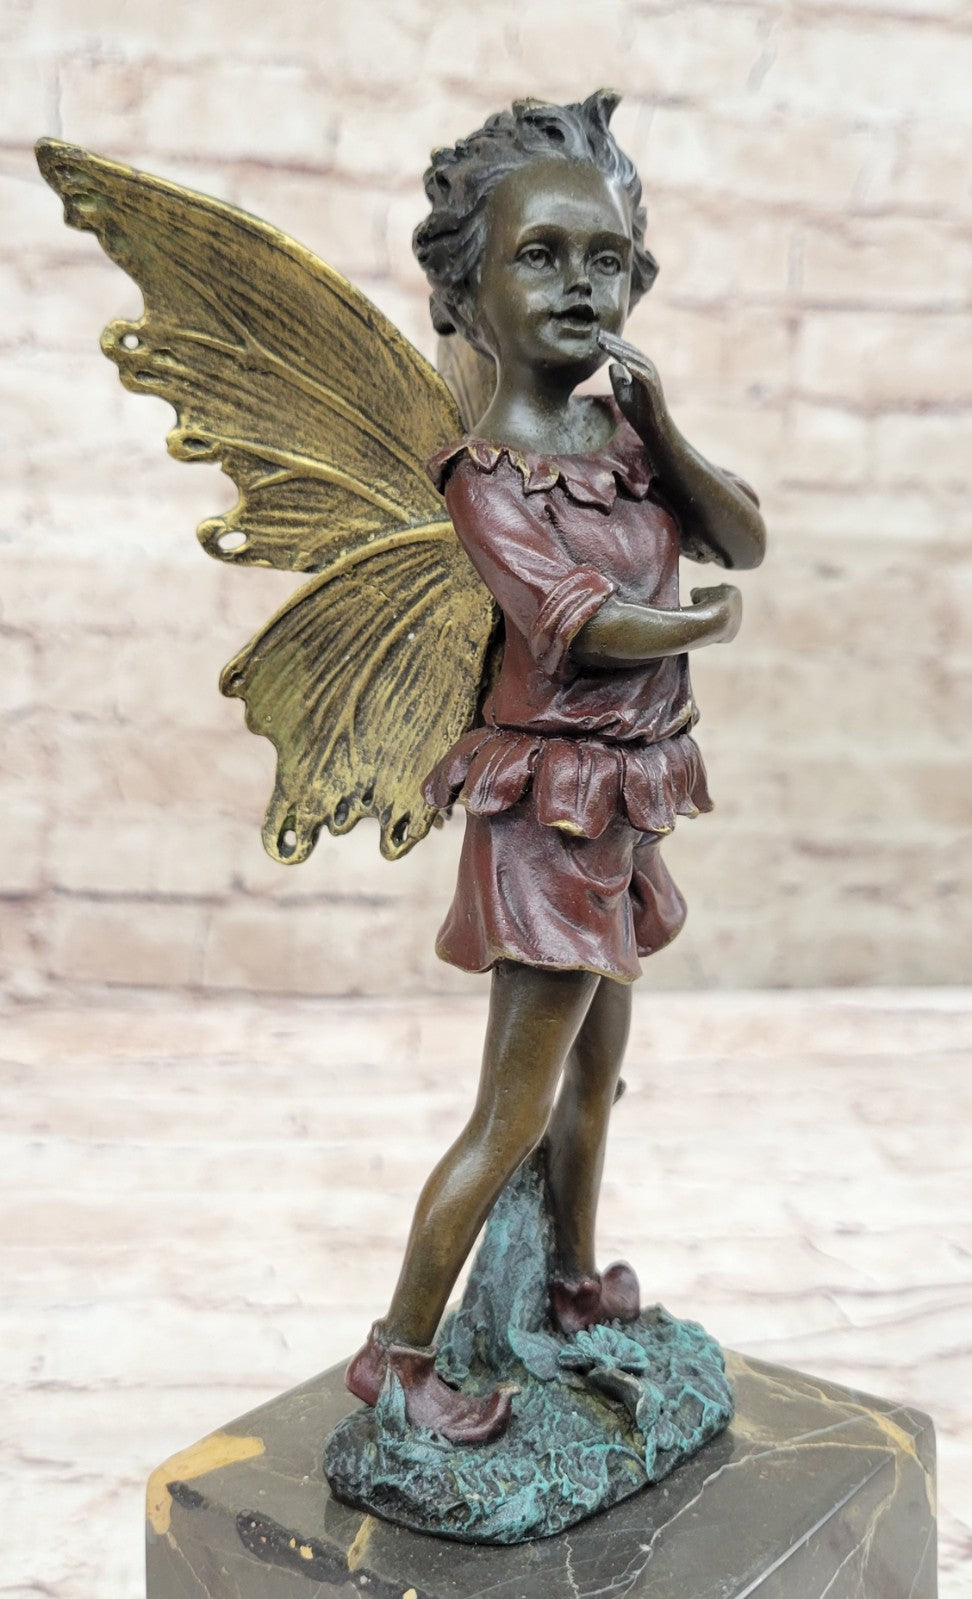 Handcrafted bronze sculpture SALE Book-End Patins Red Fairy Angel Deco Art